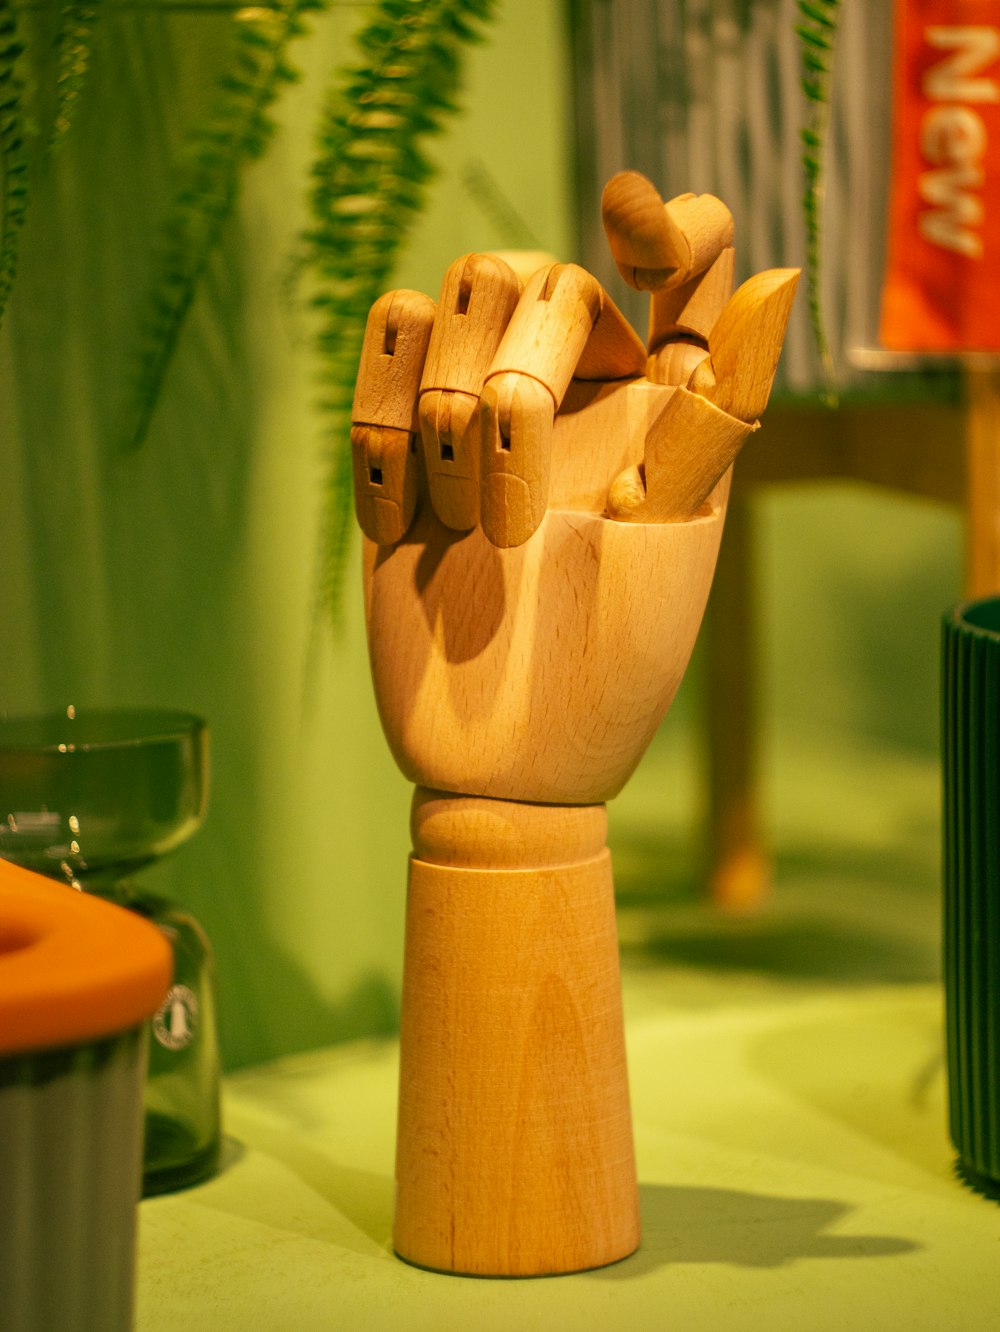 a wooden sculpture of a hand holding something